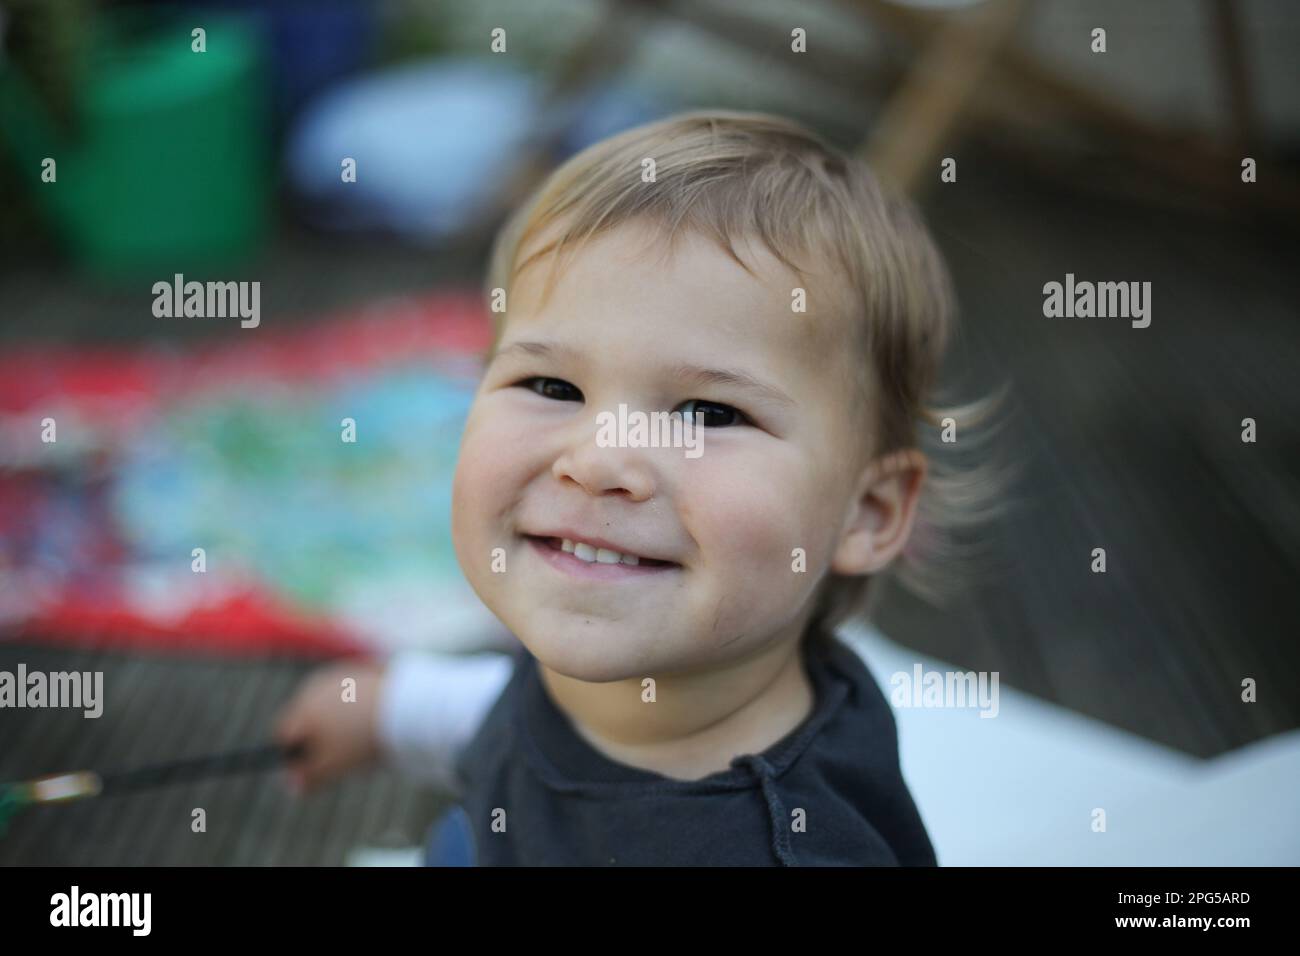 Happy baby sitting outdoors smiling Stock Photo